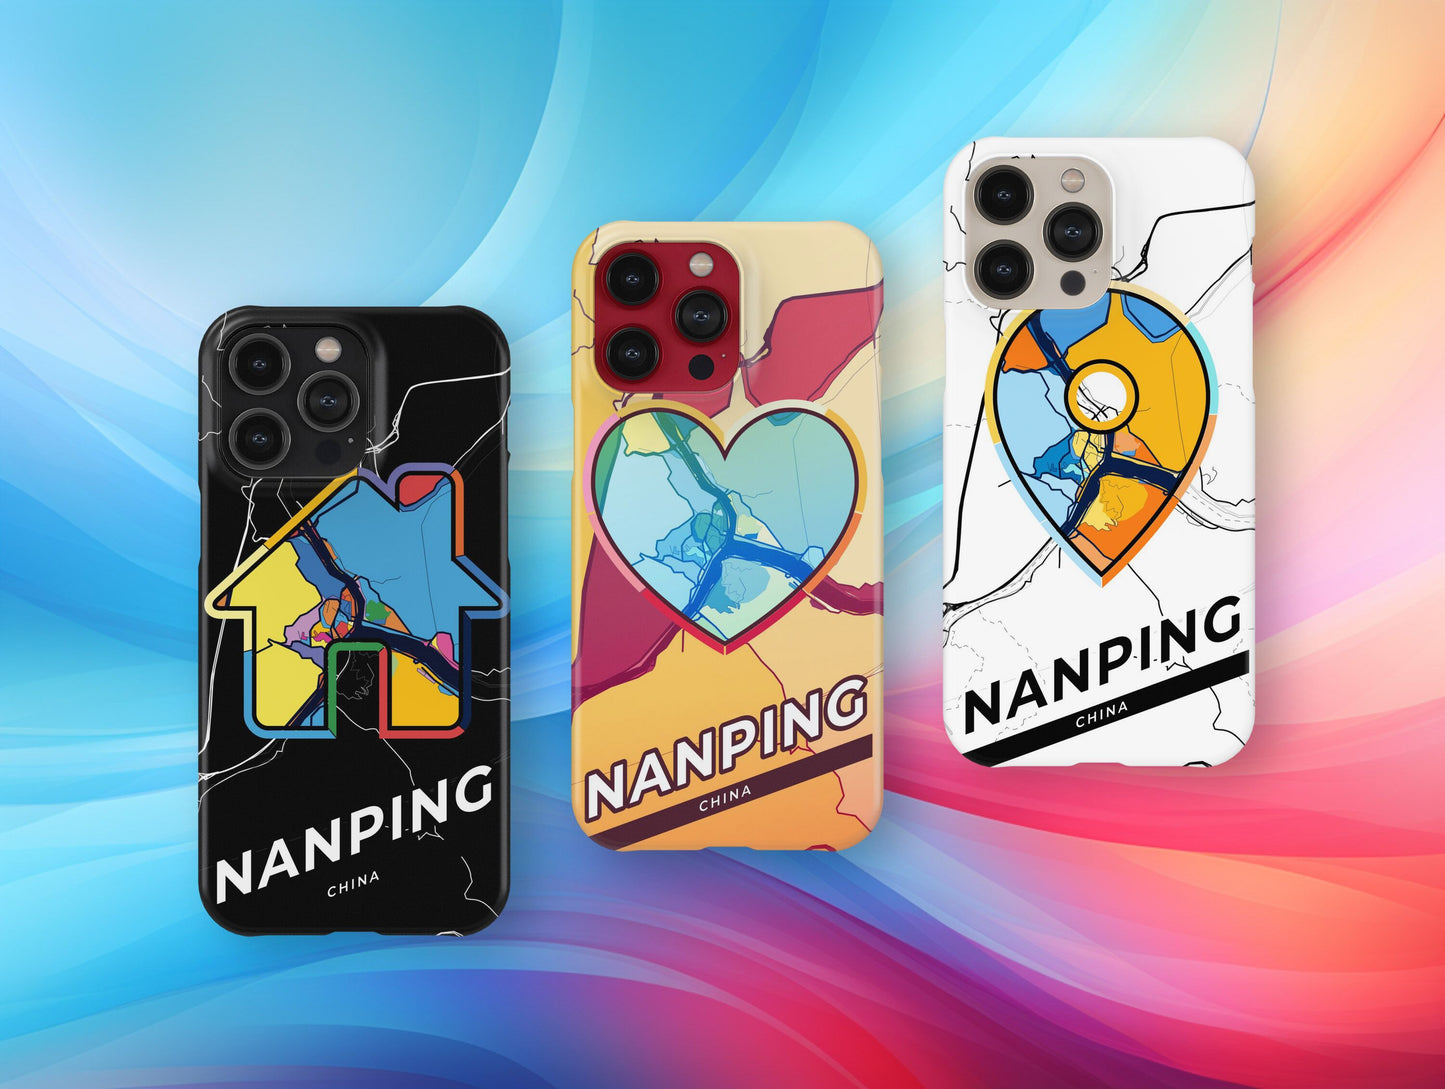 Nanping China slim phone case with colorful icon